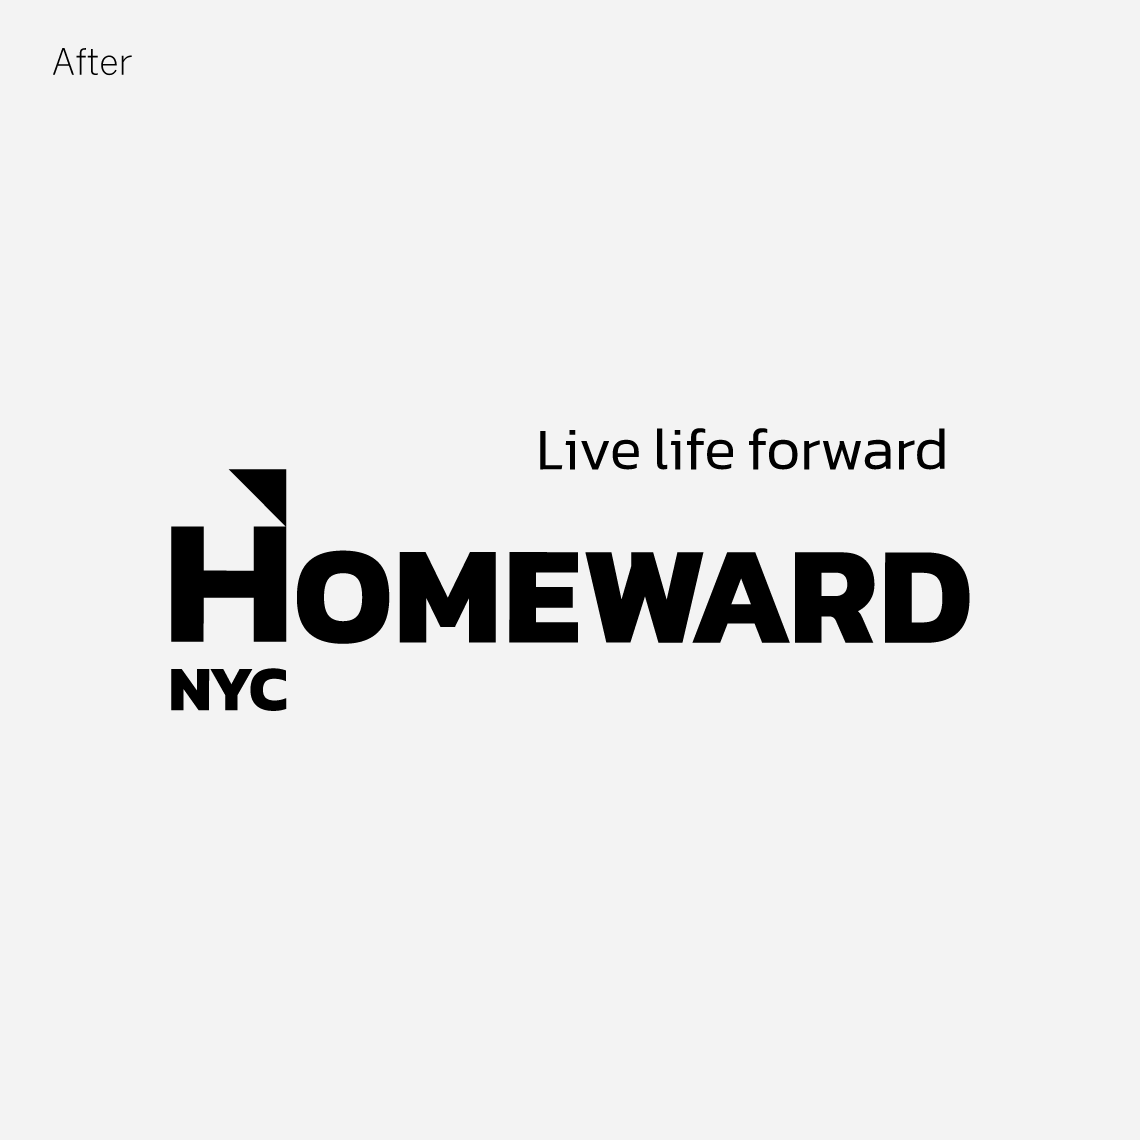 The new logo: a distinctive identity and design system. A new name "Homeward NYC" and a new tagline "Live life forward" were created to express the common goal of residents, city agencies, and donors. New logo developed: a distinctive identity and design system. A new name "Homeward NYC" and a new tagline "Live life forward" were created to express the common goal of residents, city agencies, and donors.